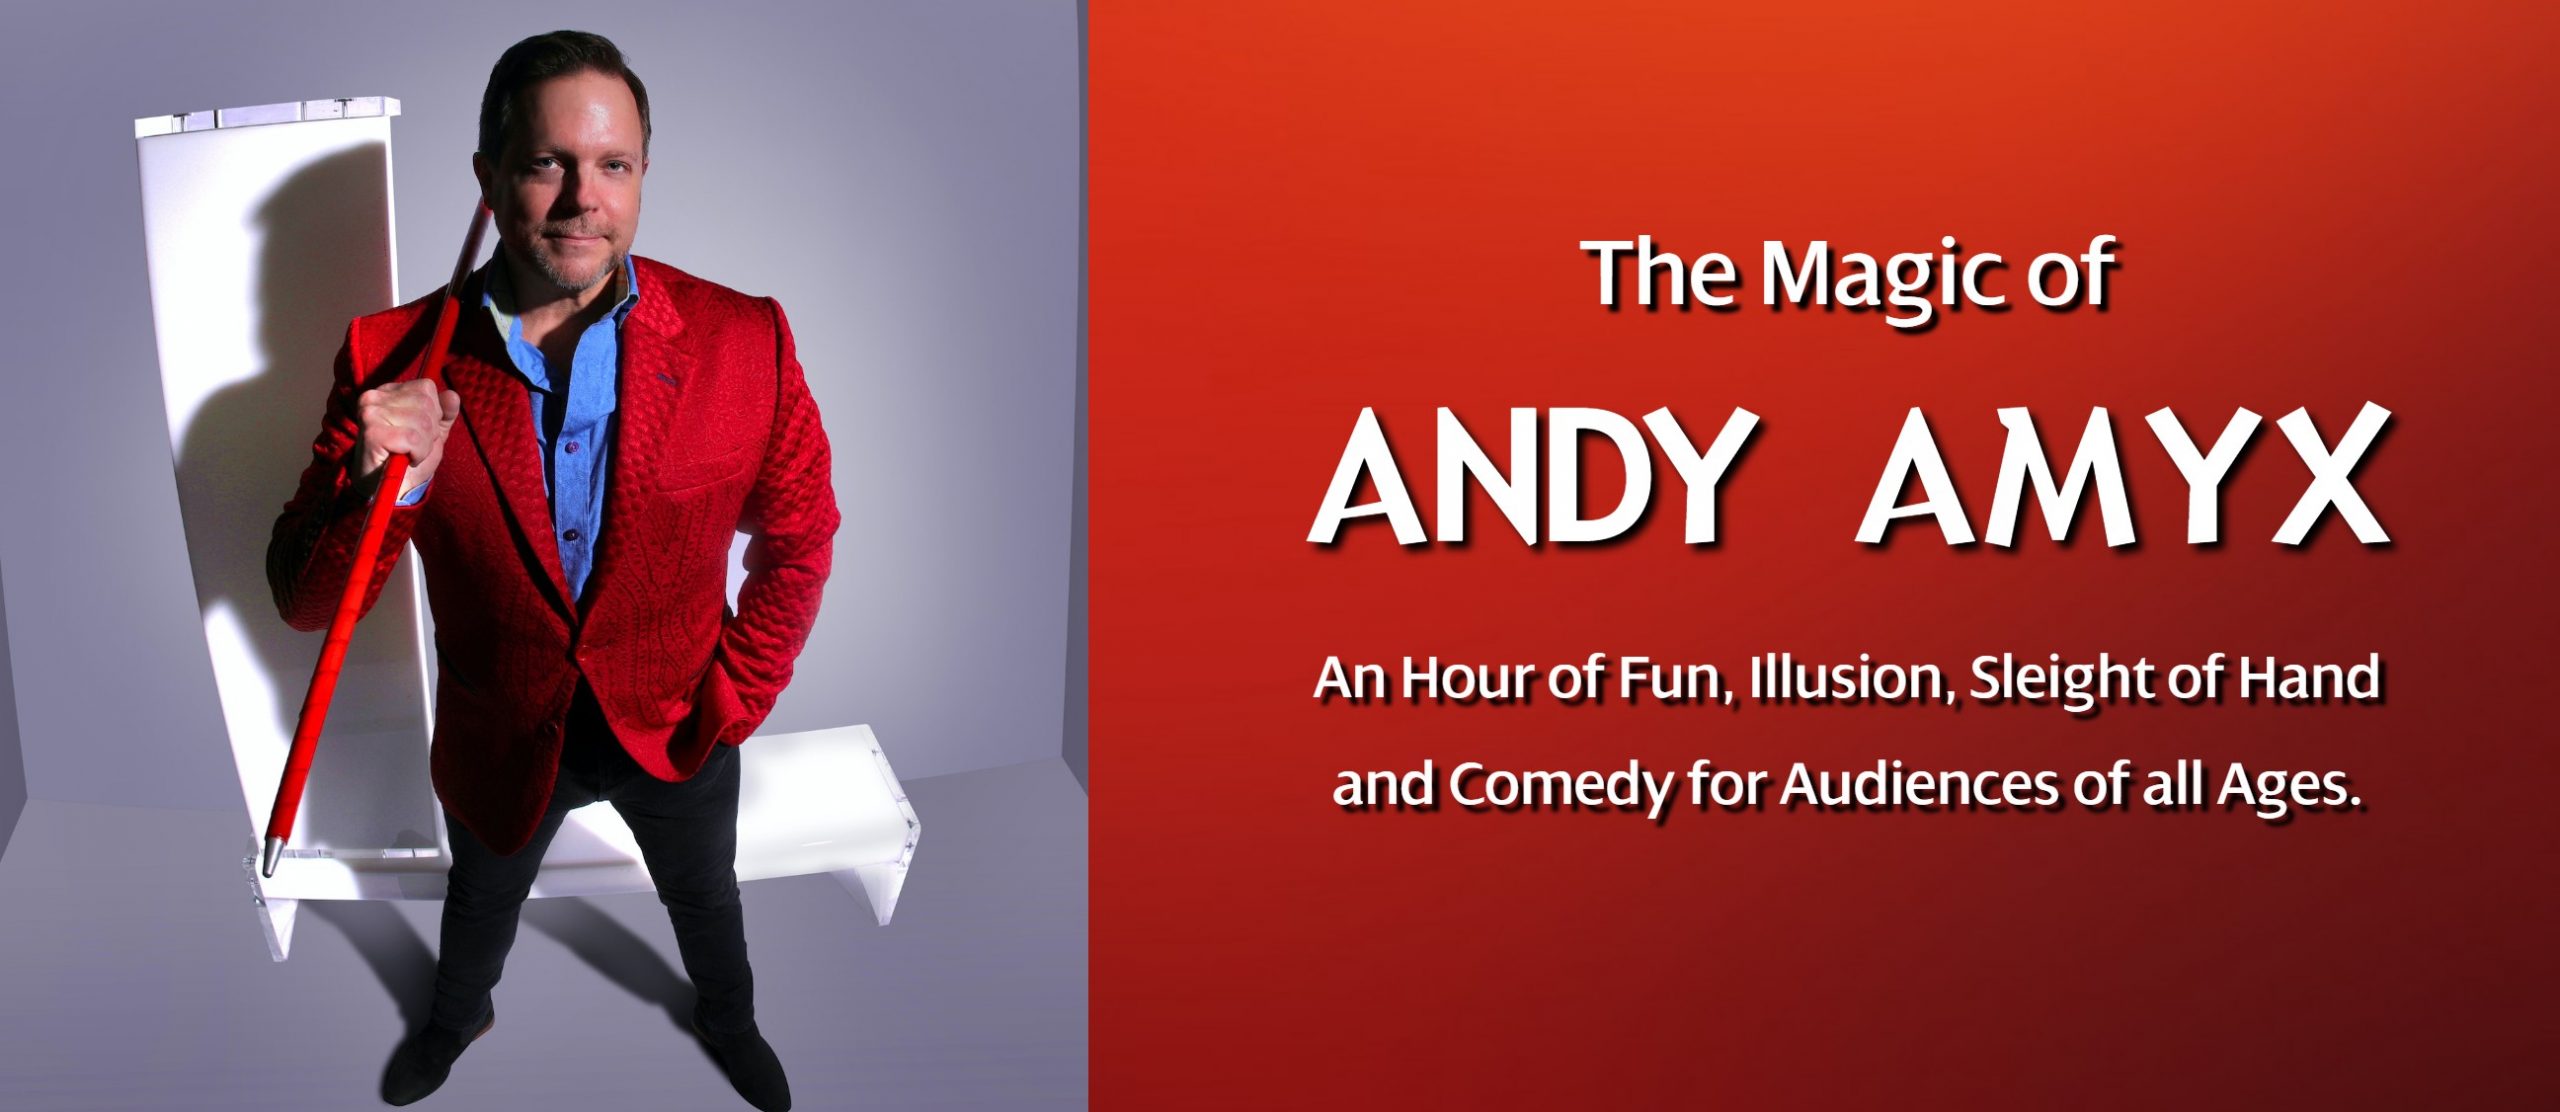 The Magic of Andy Amyx